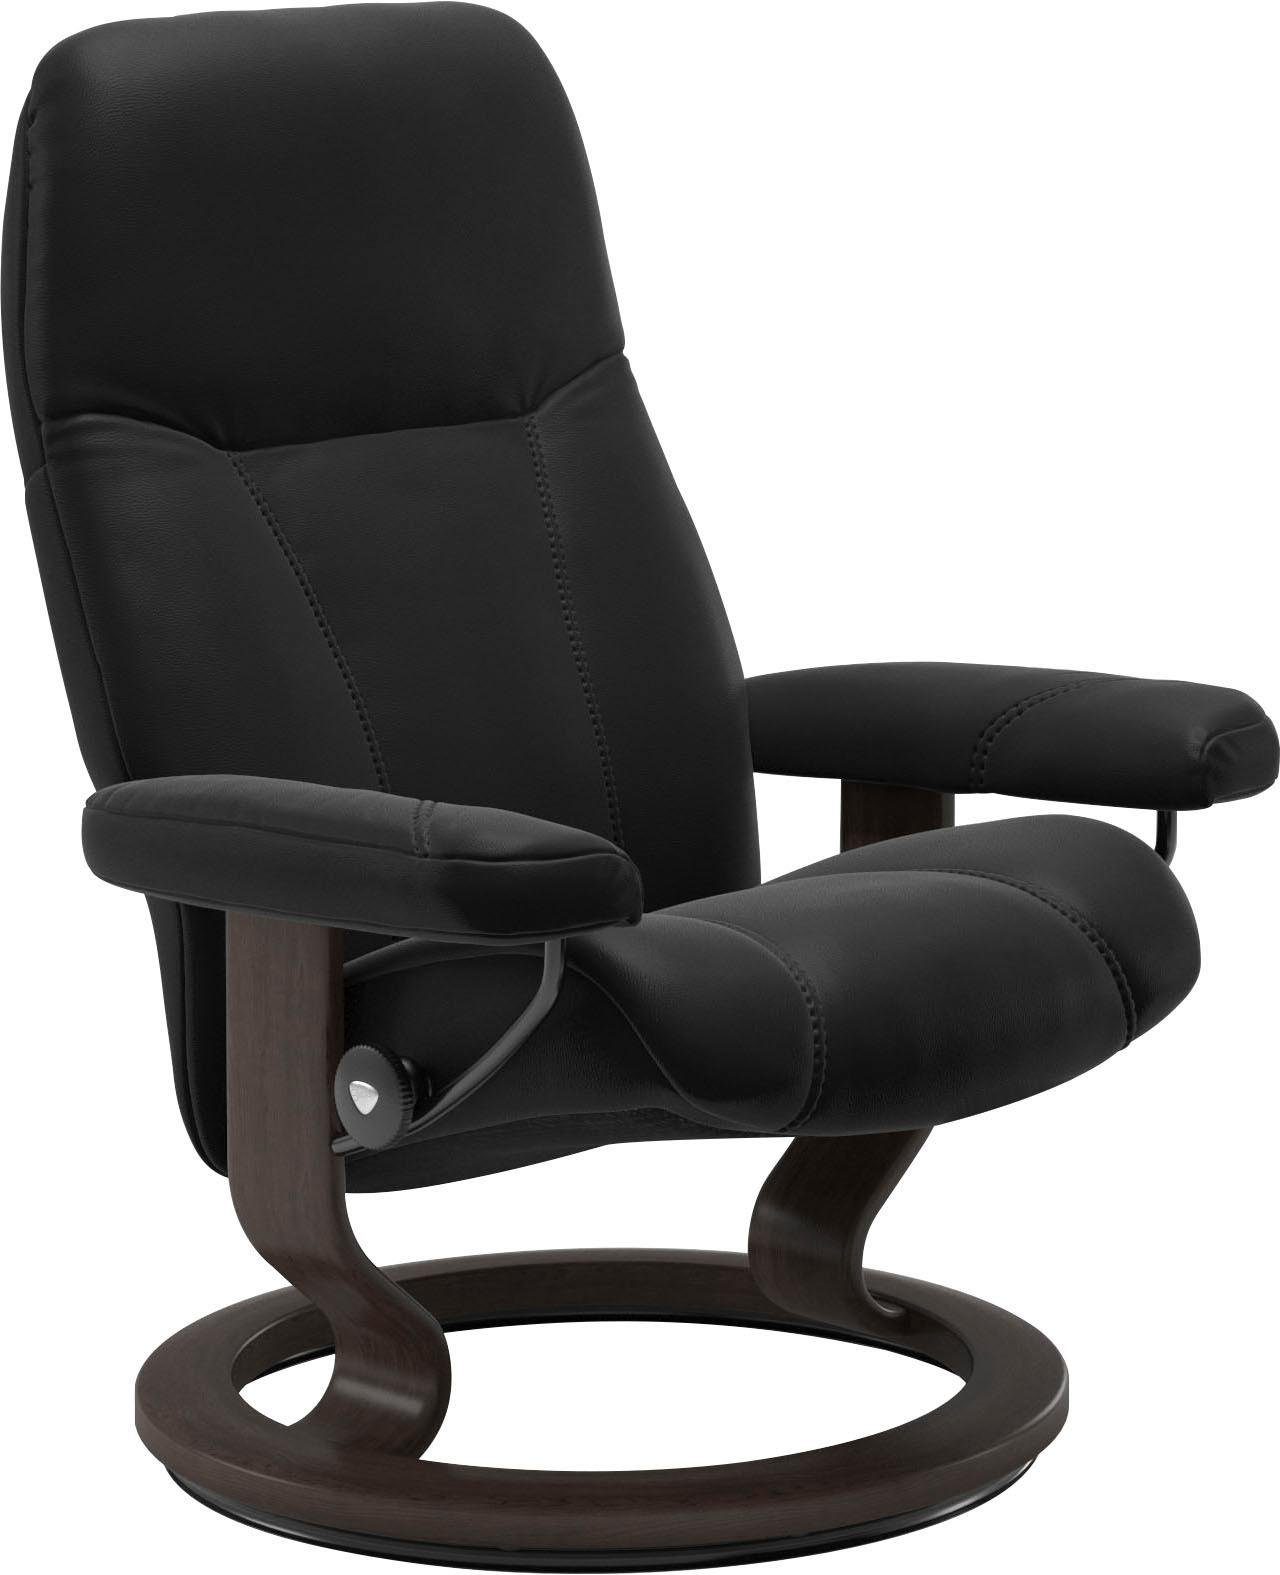 Classic mit Stressless® Gestell Base, Größe S, Wenge Consul, Relaxsessel